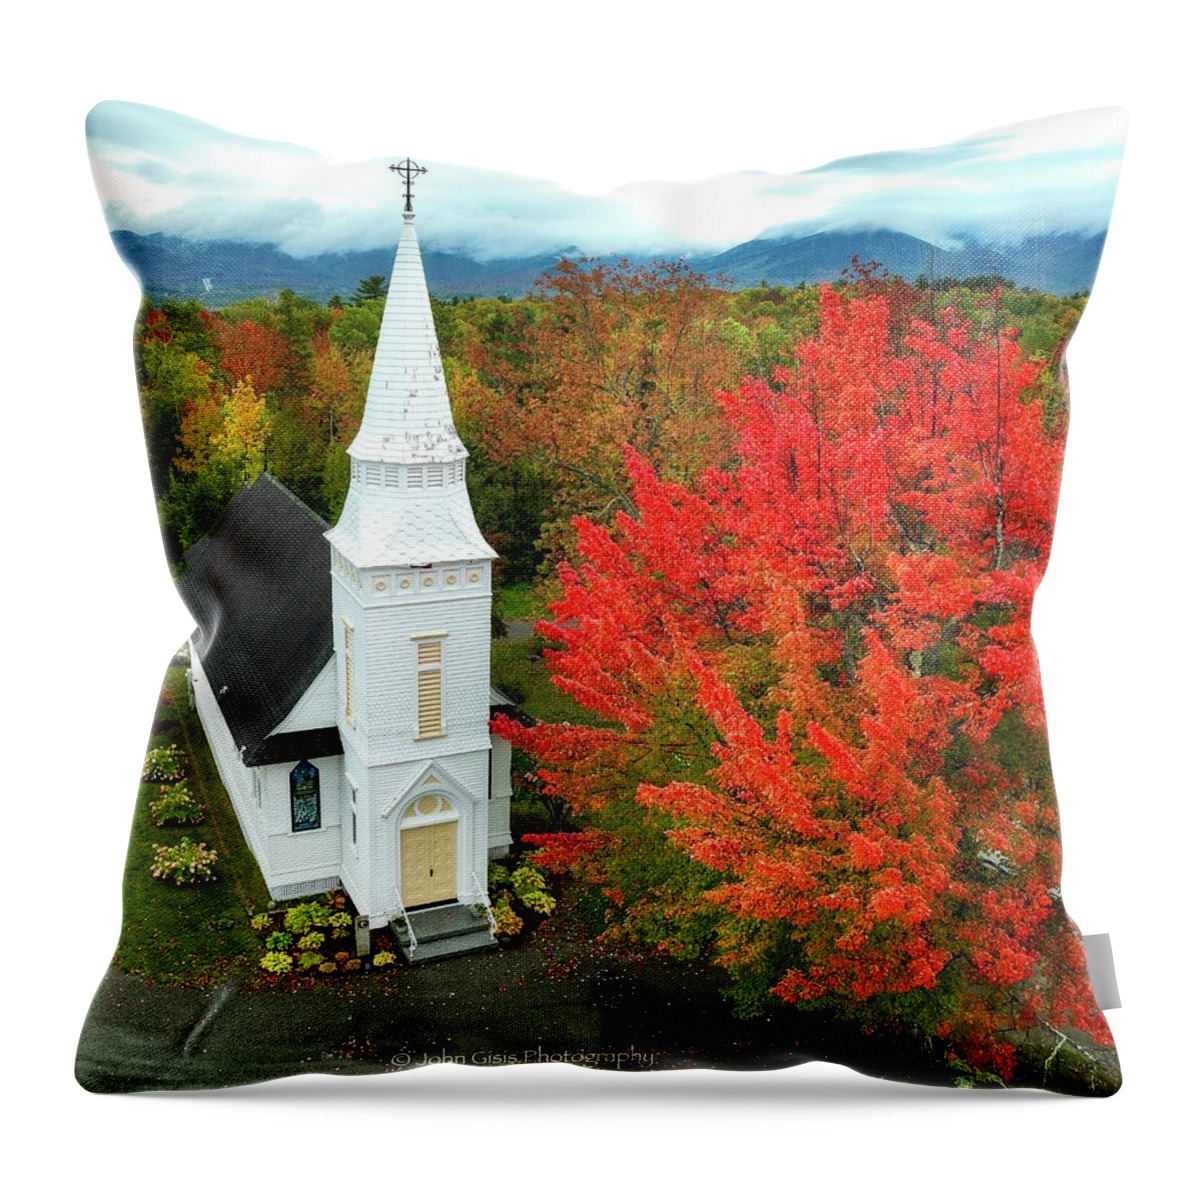  Throw Pillow featuring the photograph Sugar Hill by John Gisis